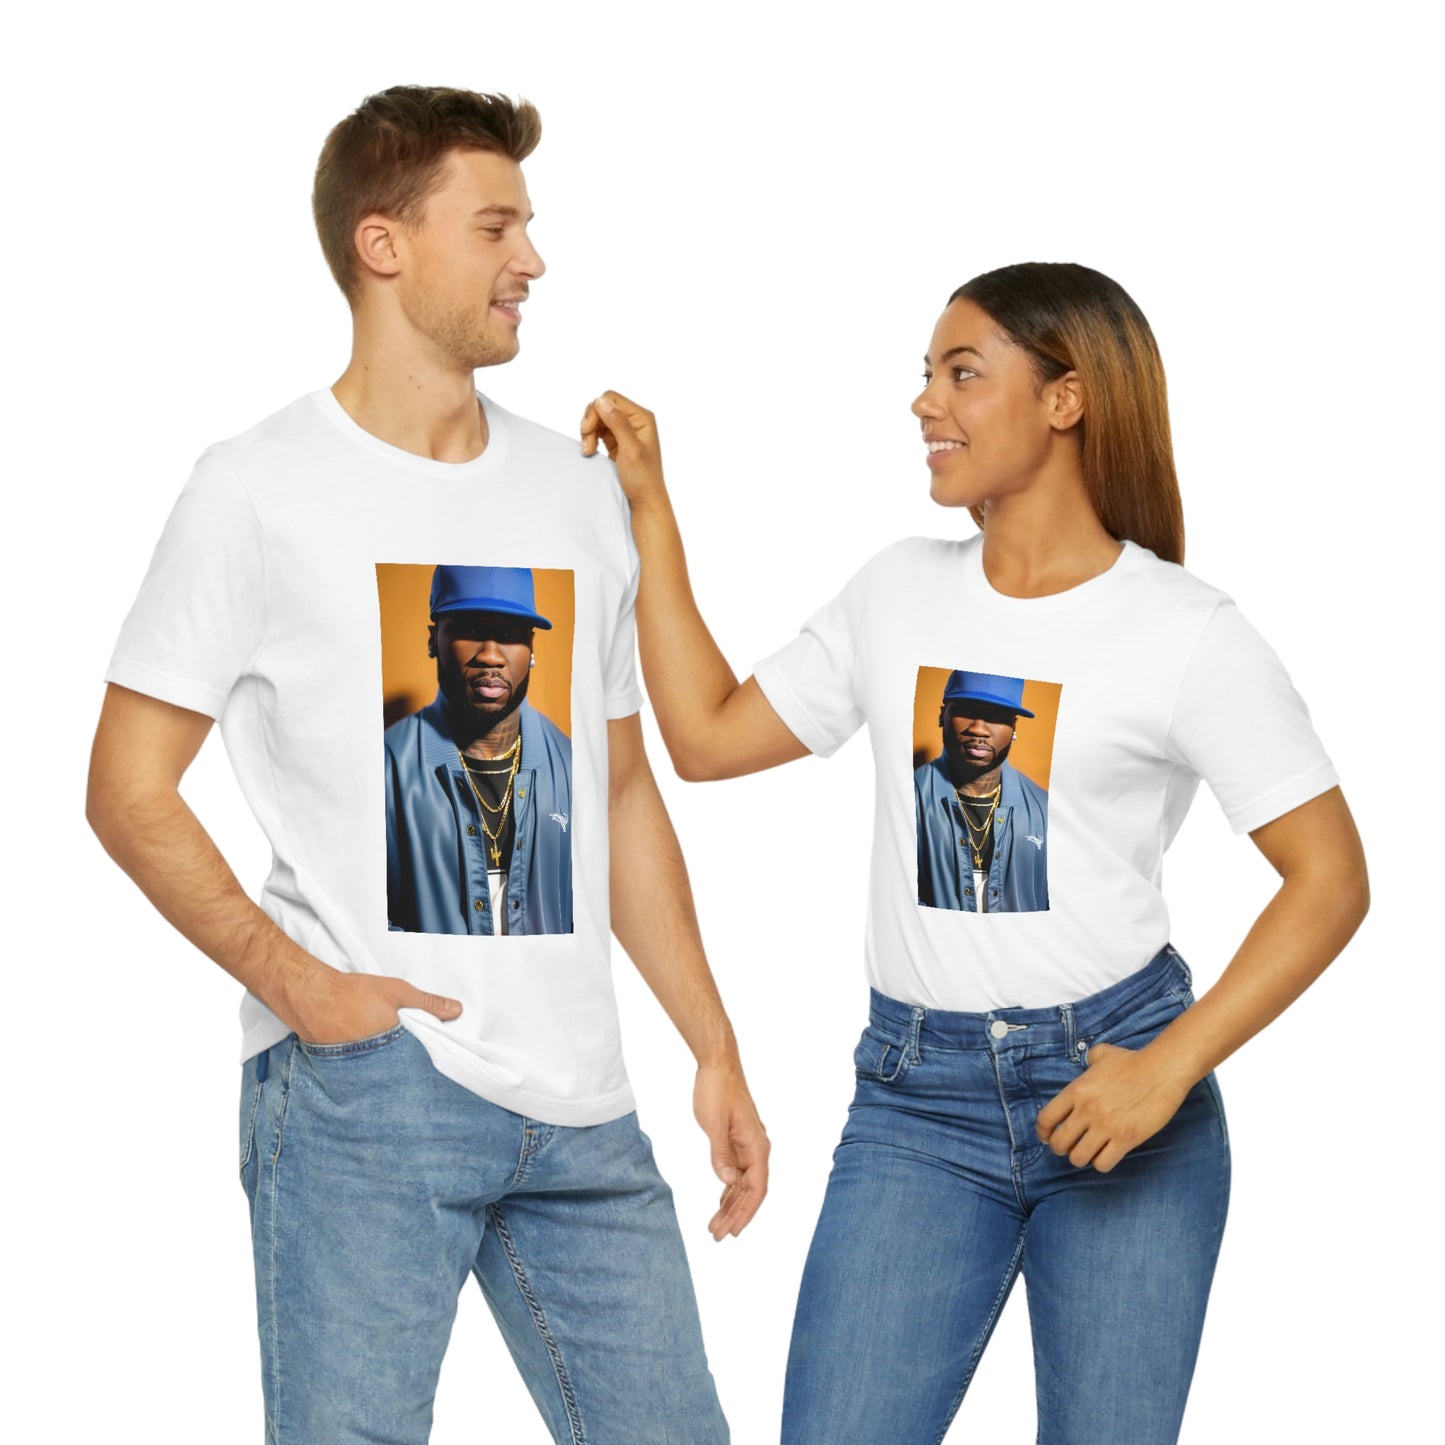 50 Cent Blue Hat Tee